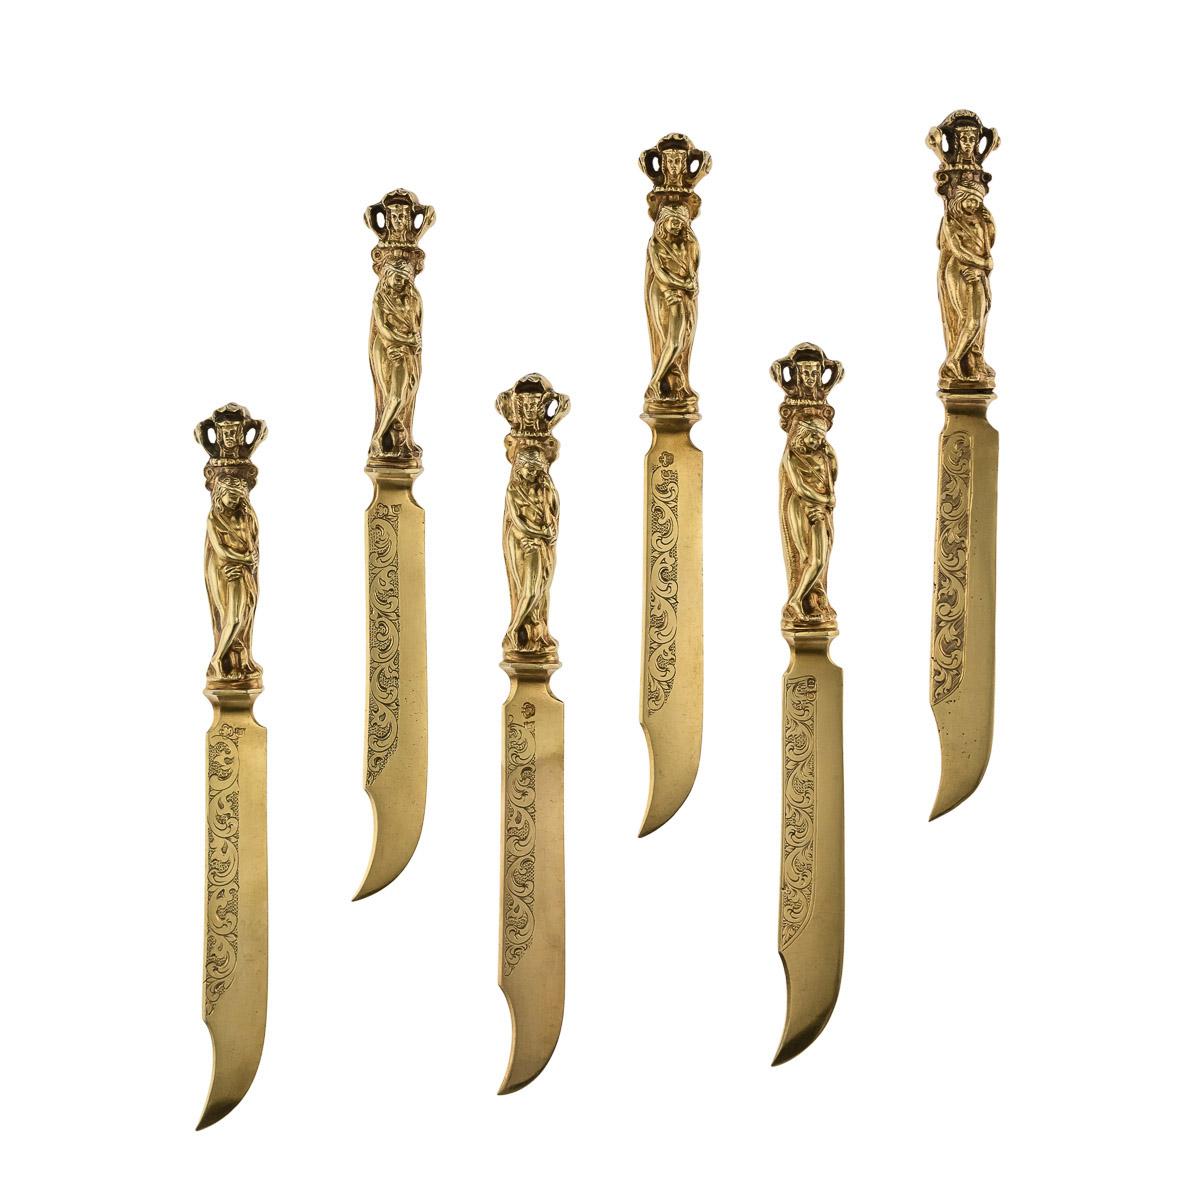 Antique mid-19th century German extremely rare Renaissance style 14-karat solid gold cutlery set, comprising: six spoons, six forks and six knives. The finely modelled, cast figural handles in form of a loosely draped woman, one arm seductively